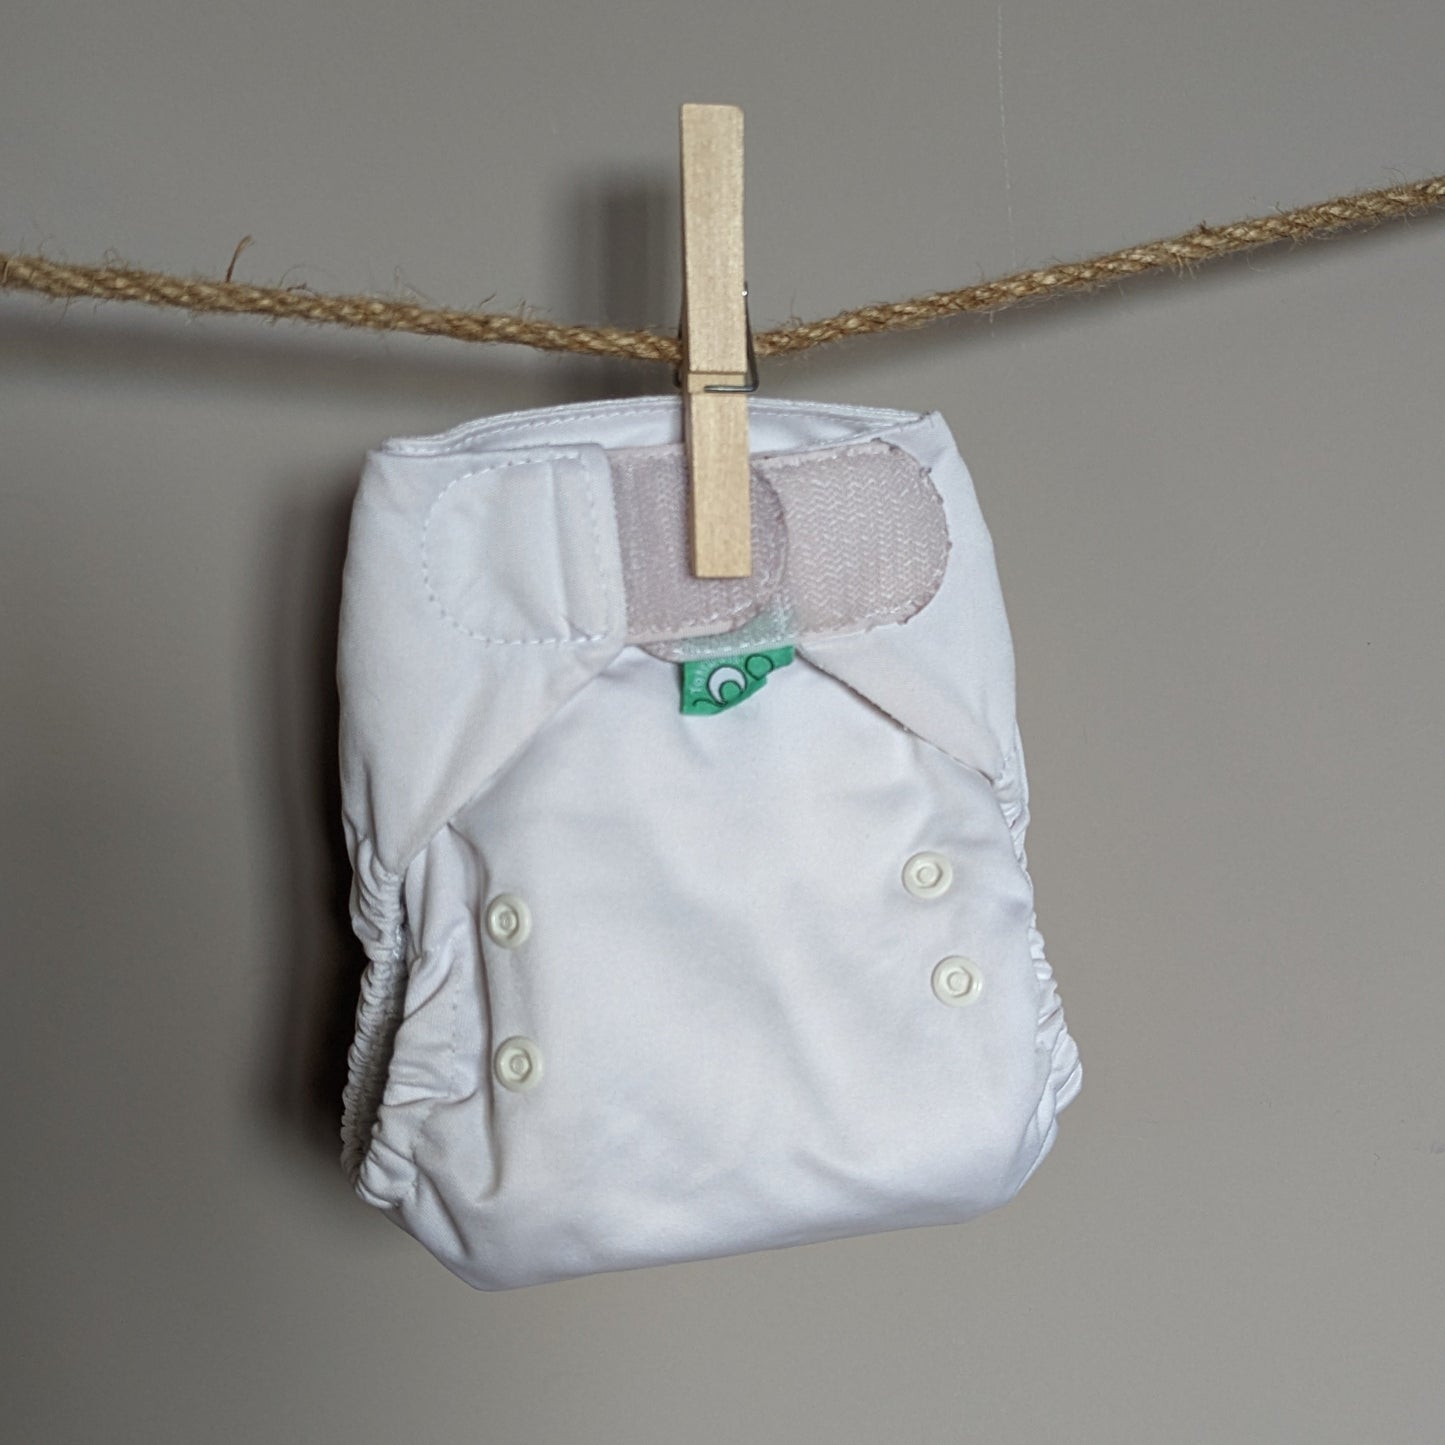 Tots Bots Easyfit All in One Nappy-All In One Nappy-Tots Bots-White-The Nappy Market